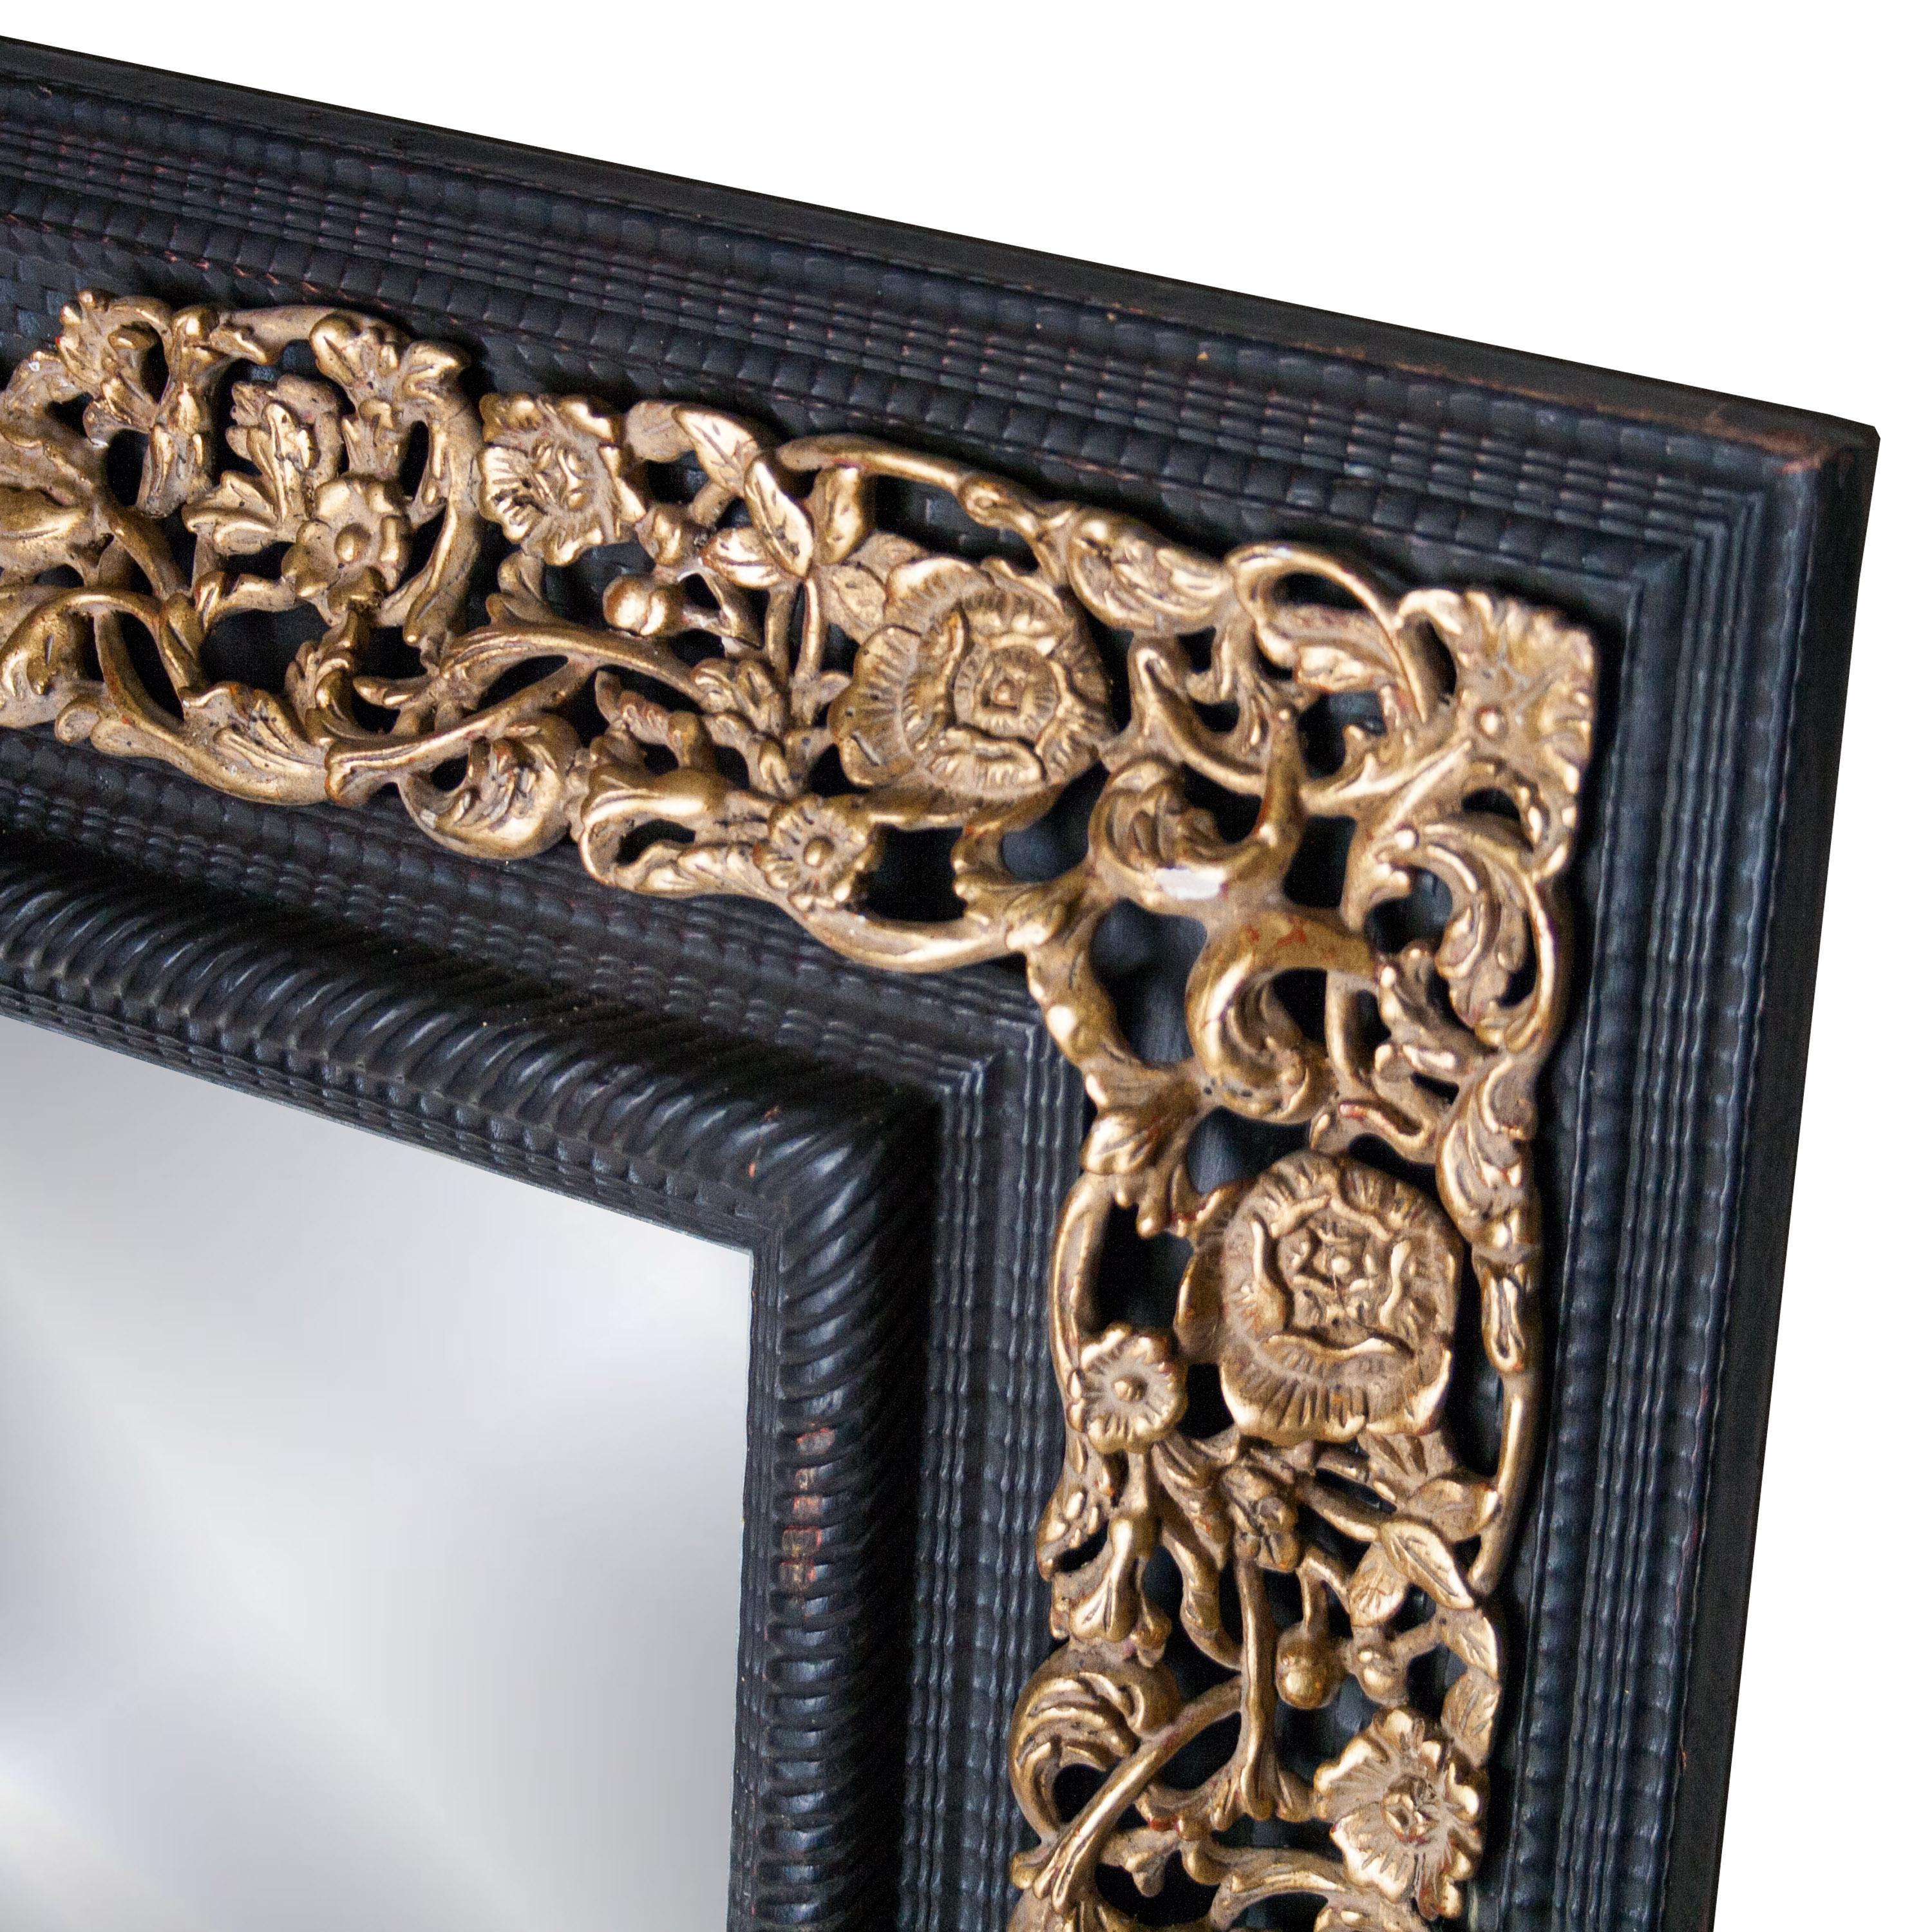 Neoclassical Revival Regency Rectangular Handcrafted Black Gold Foil Wood Mirror Spain, 1970 For Sale